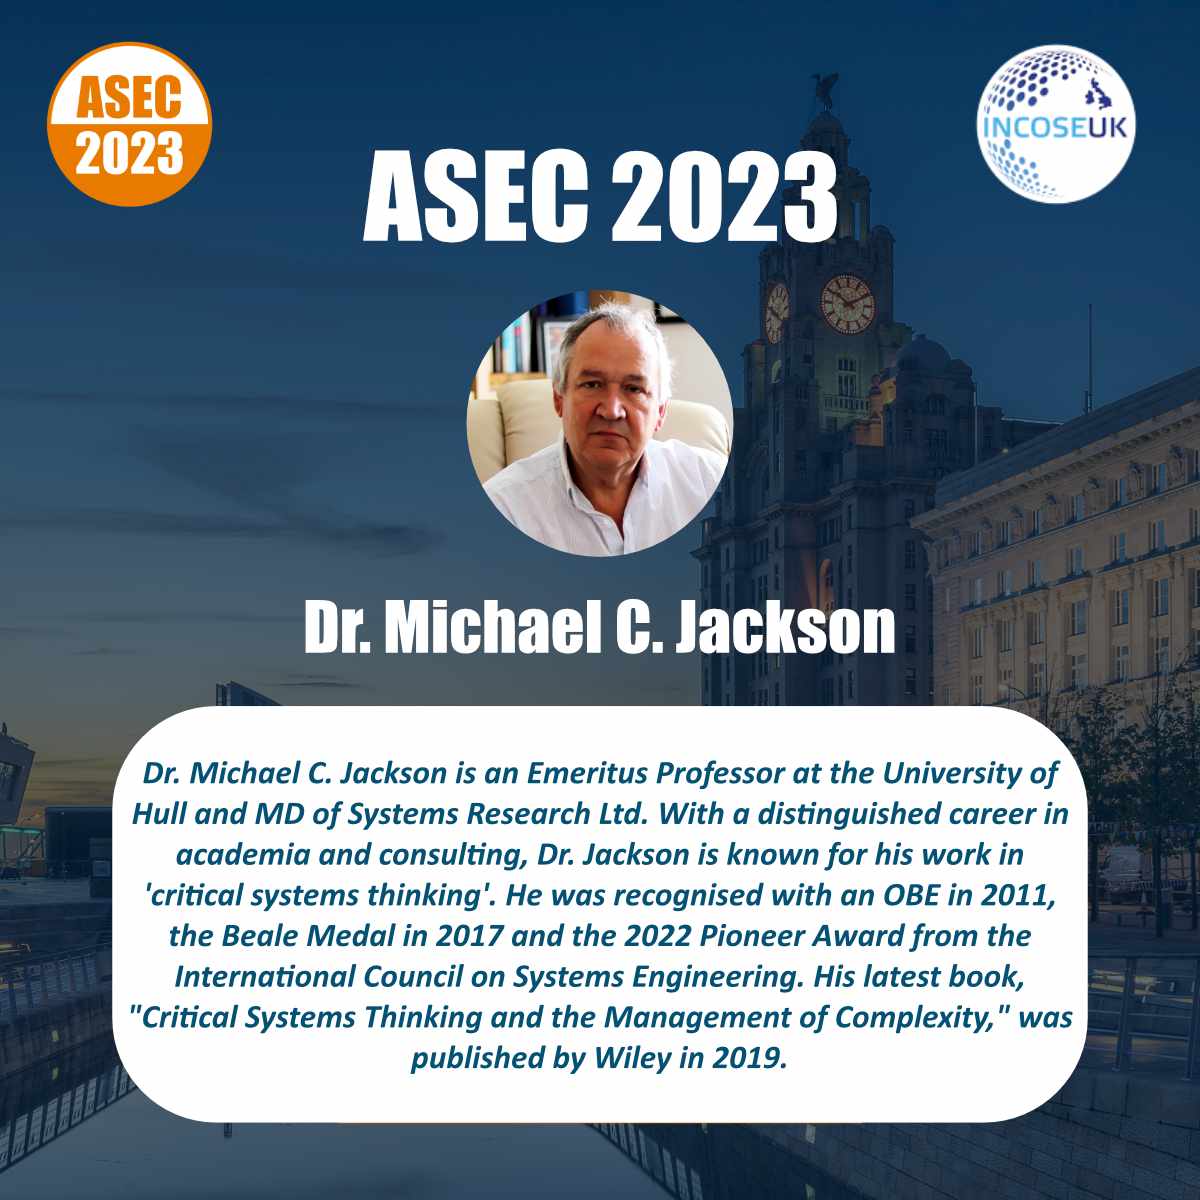 Meet the Keynote Speakers of ASEC 2023! 🎤 Explore the backgrounds and expertise of @NikeFolayan, @Dr_Eluned and Dr Michael C. Jackon. Discover the full program and book your spot at asec2023.org.uk #ASEC2023UK #SystemsEngineering